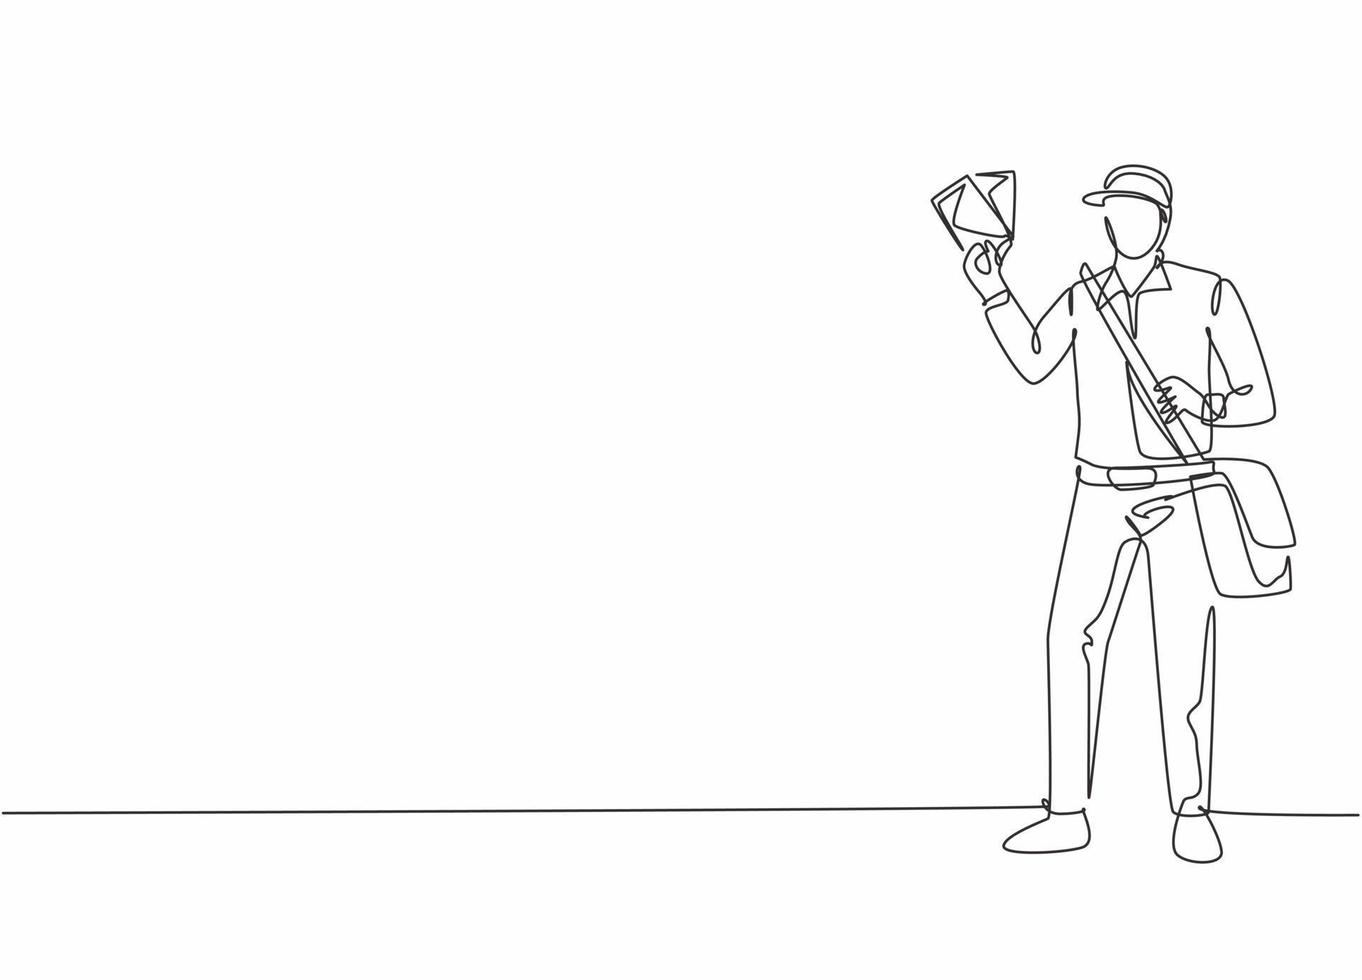 Continuous one line drawing of young mailman pose standing and holding envelopes while bringing bag. Professional job profession minimalist concept. Single line draw design vector graphic illustration